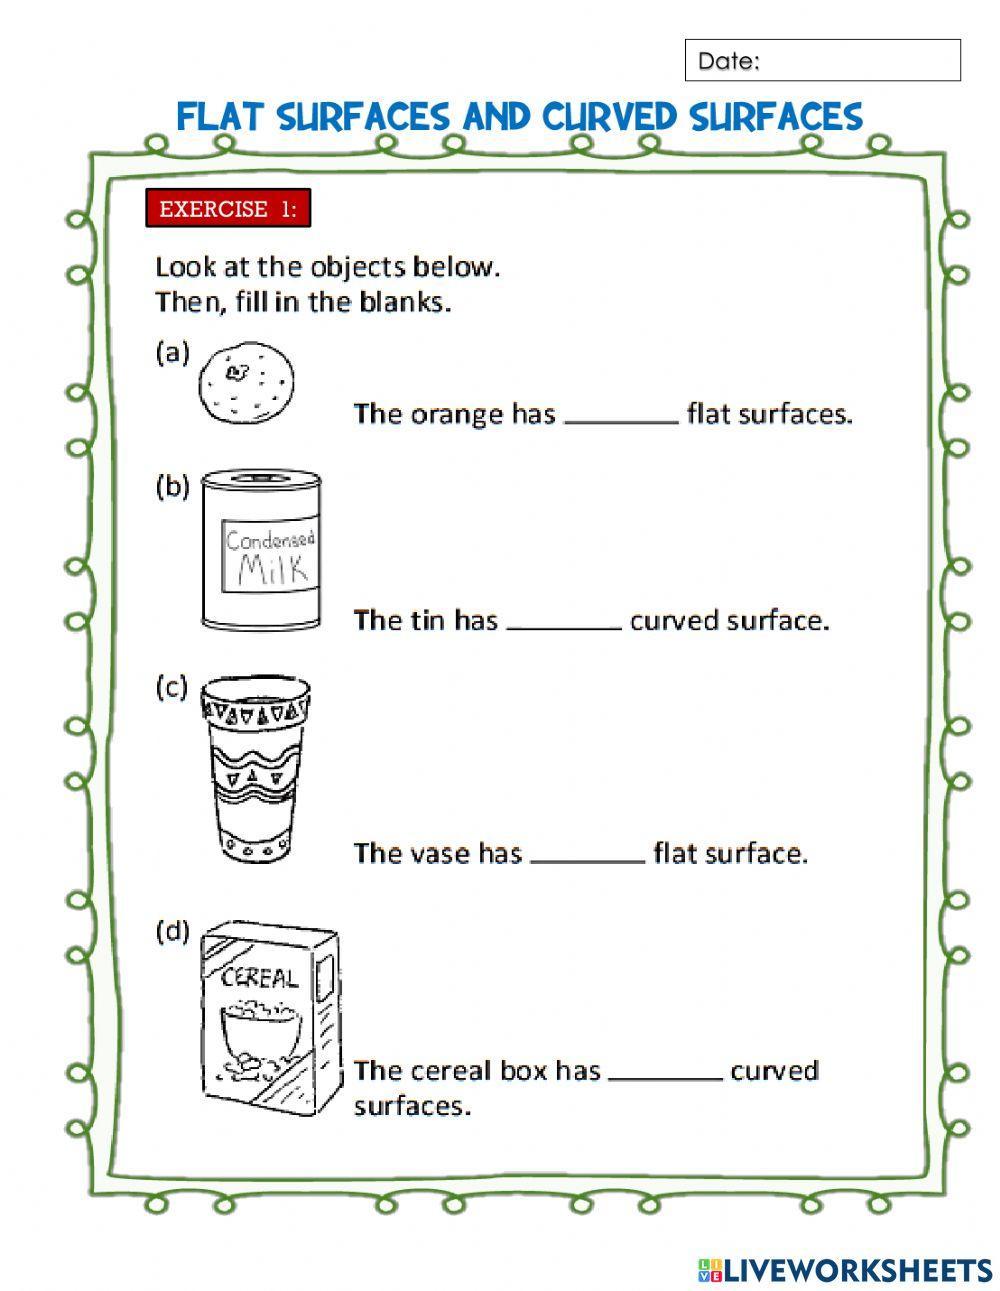 Flat surfaces and curved surfaces worksheet | Live Worksheets